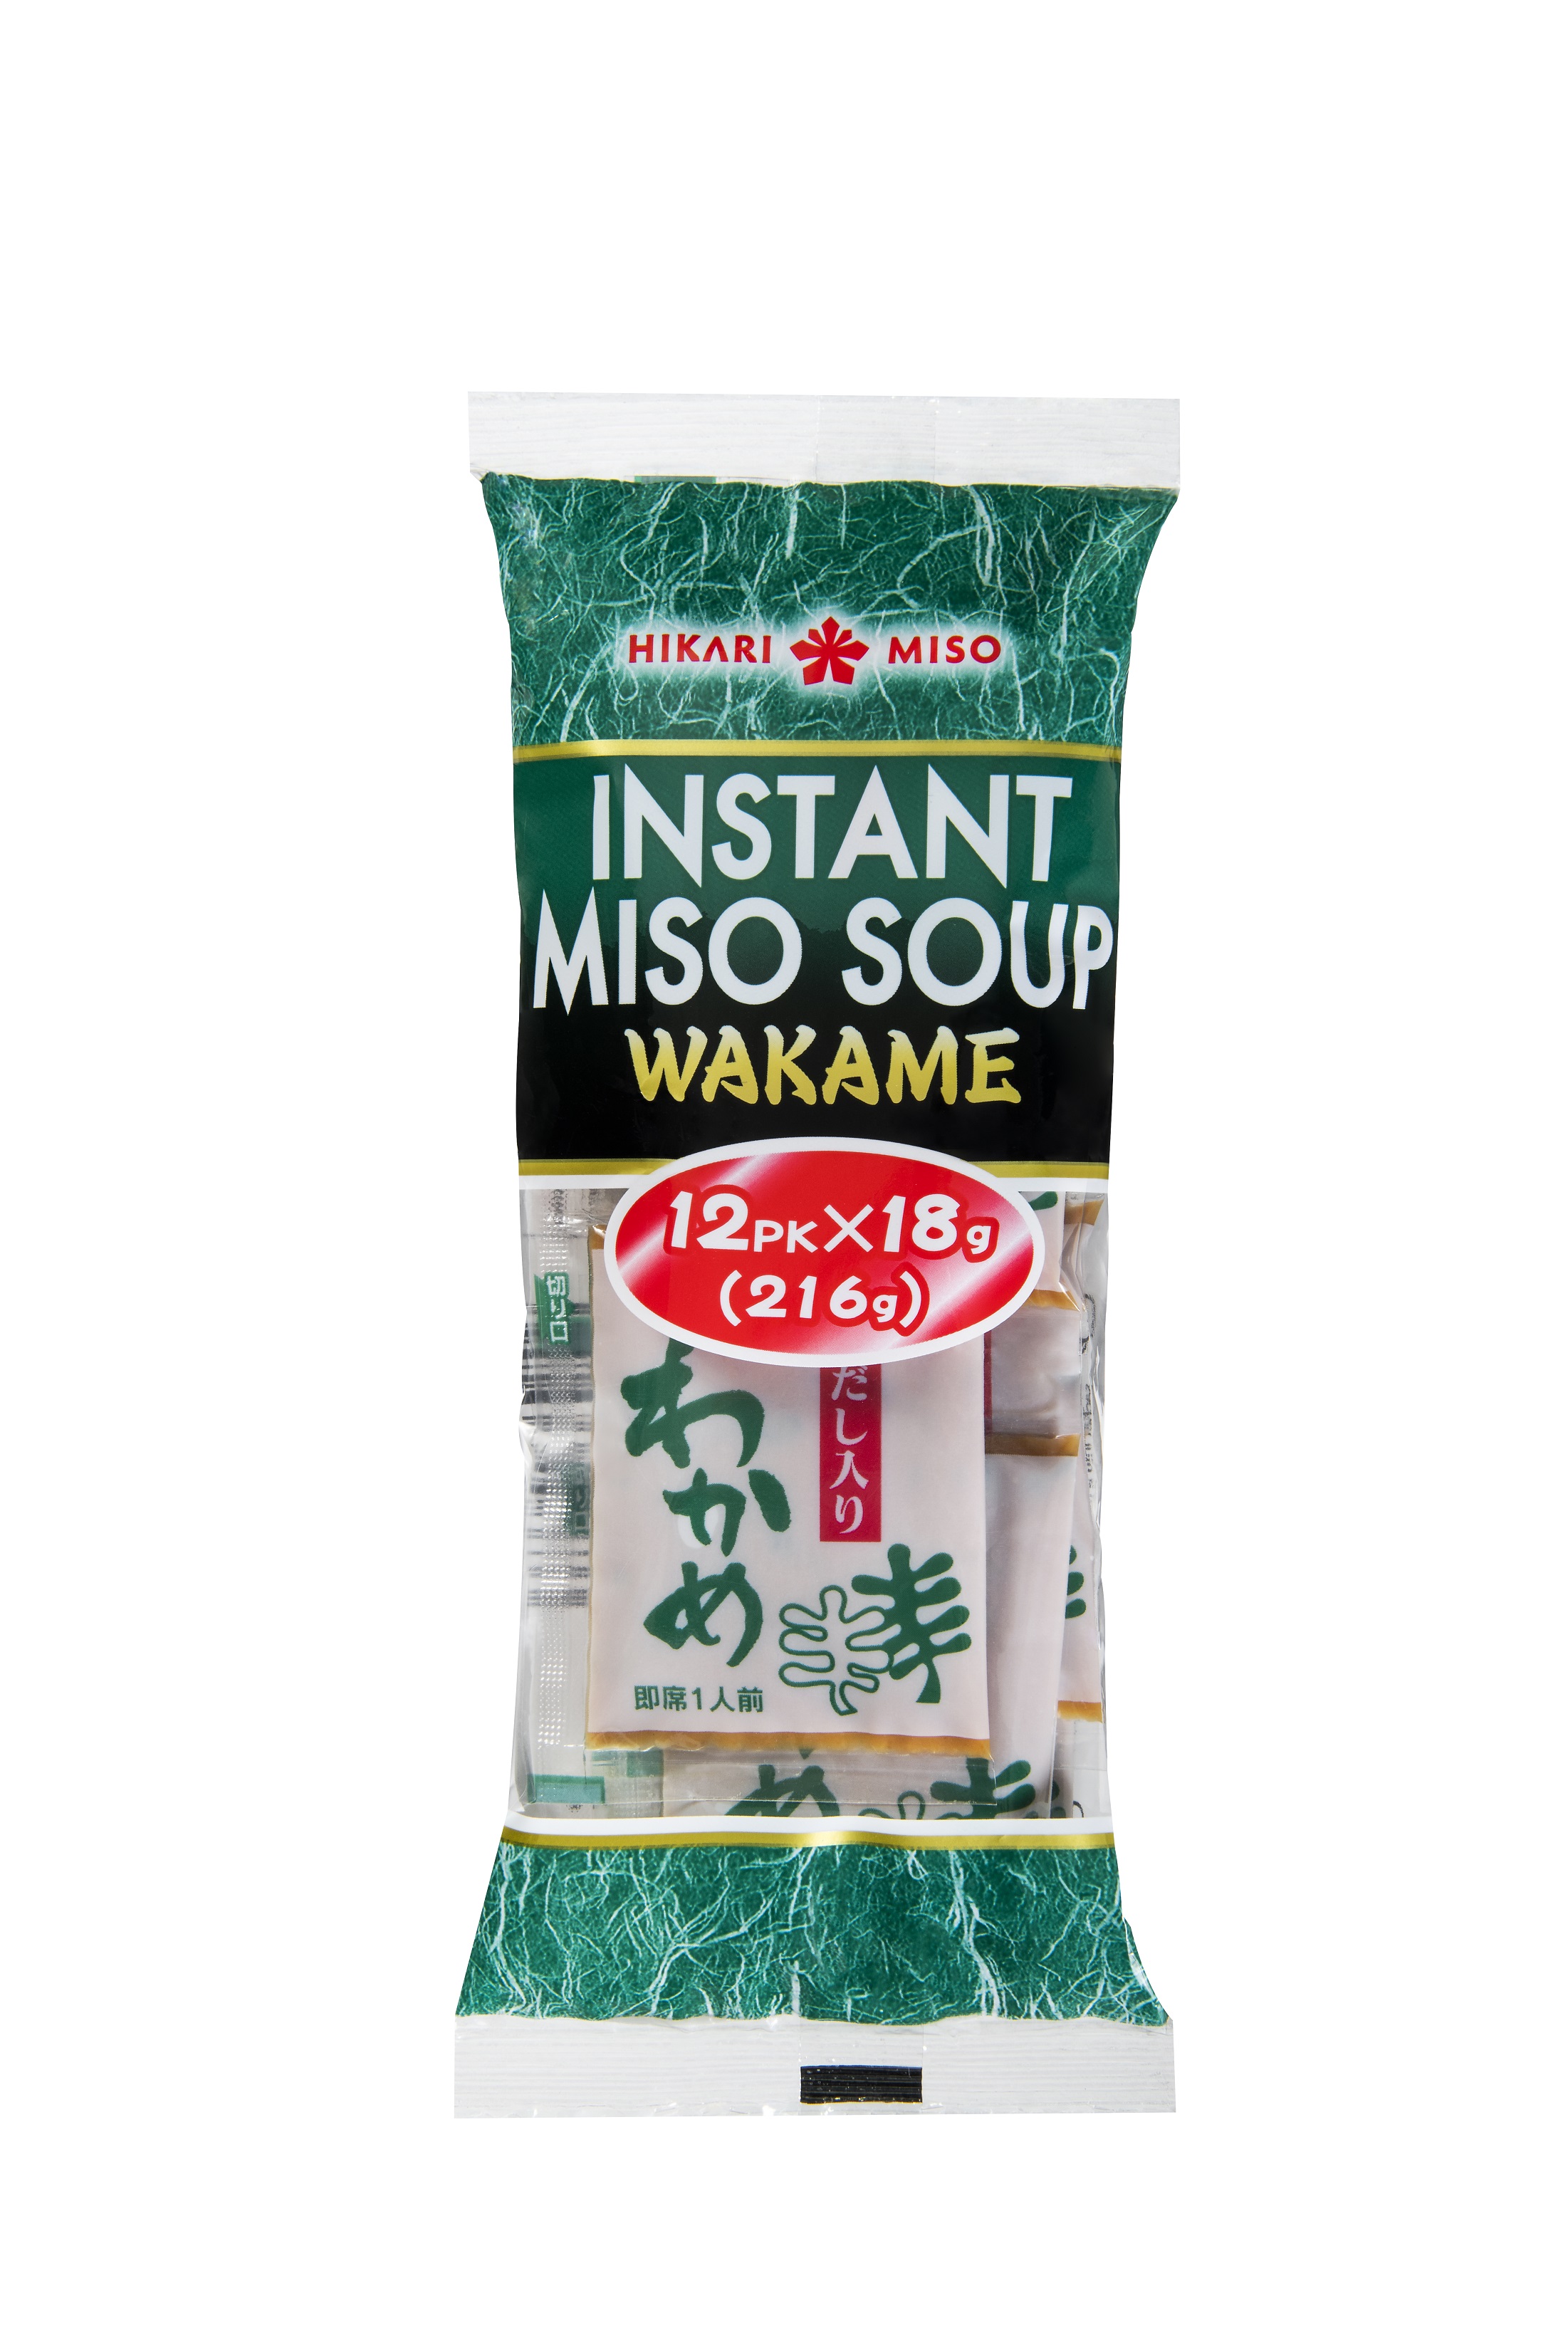 Wakame Miso Soup12 servings7.6 oz(216g)